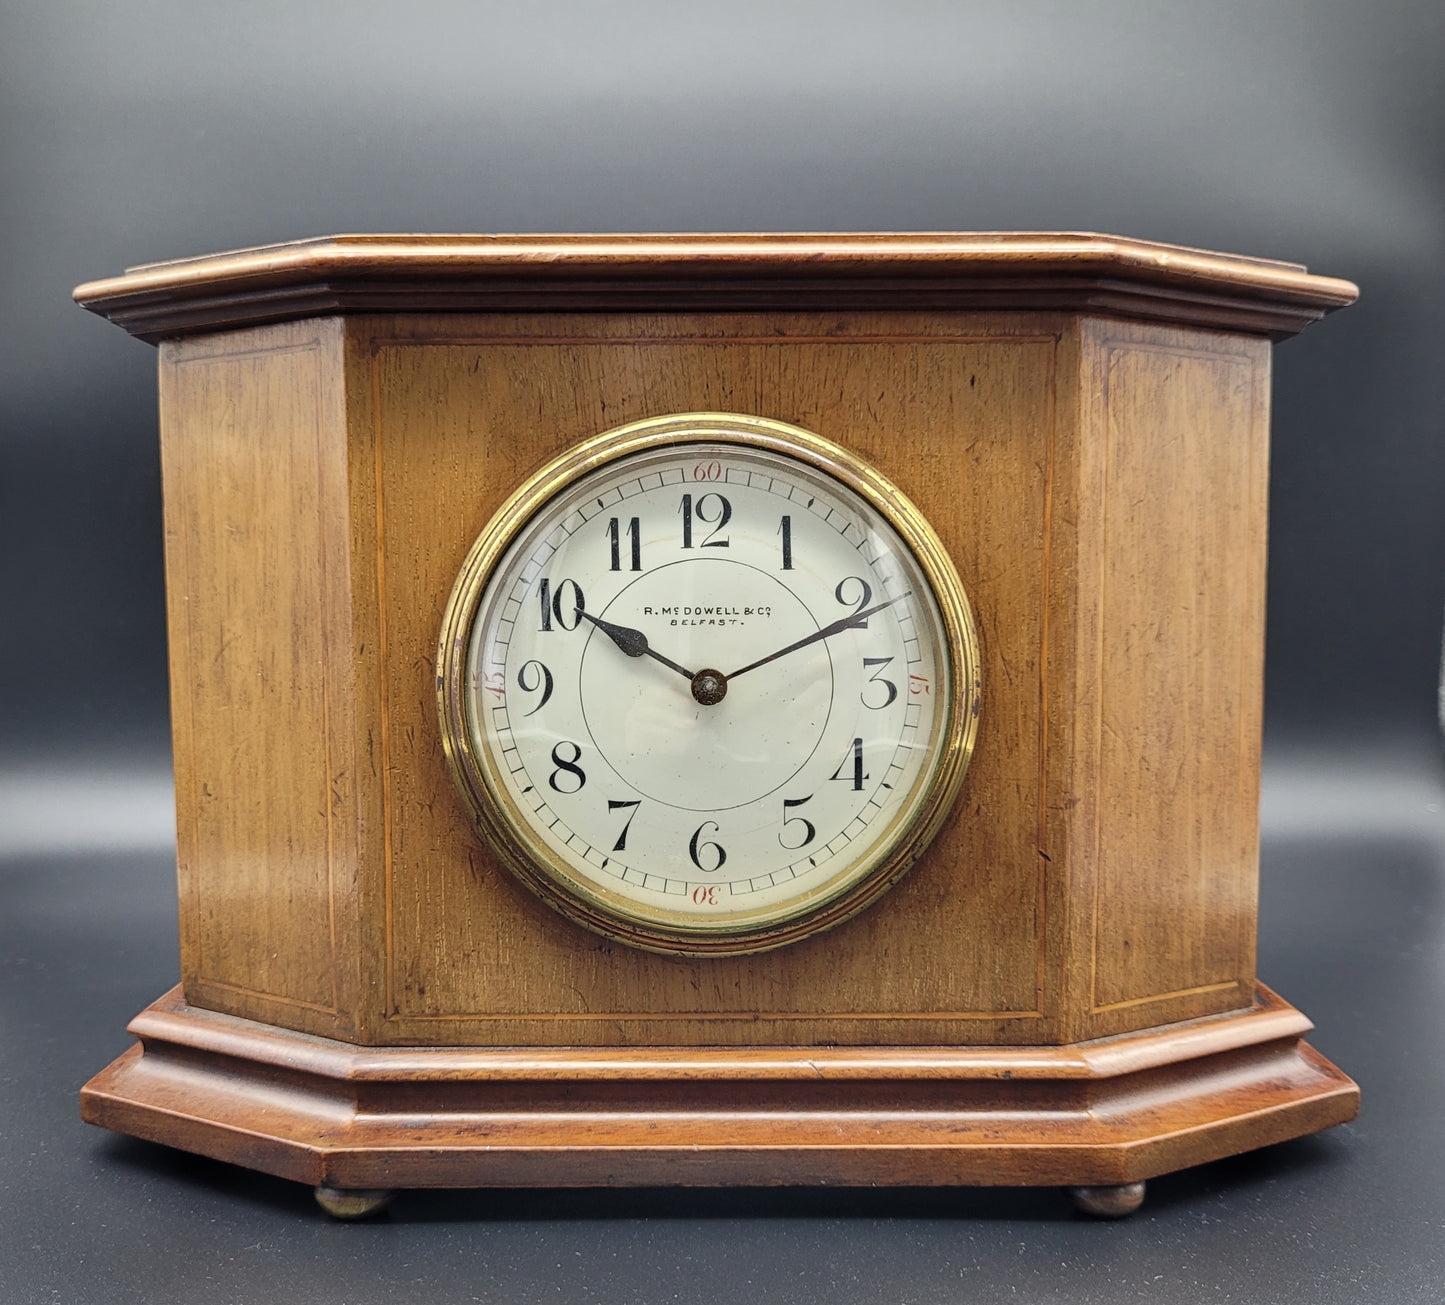 Antique Clock Retailed by R.mc Dowell 